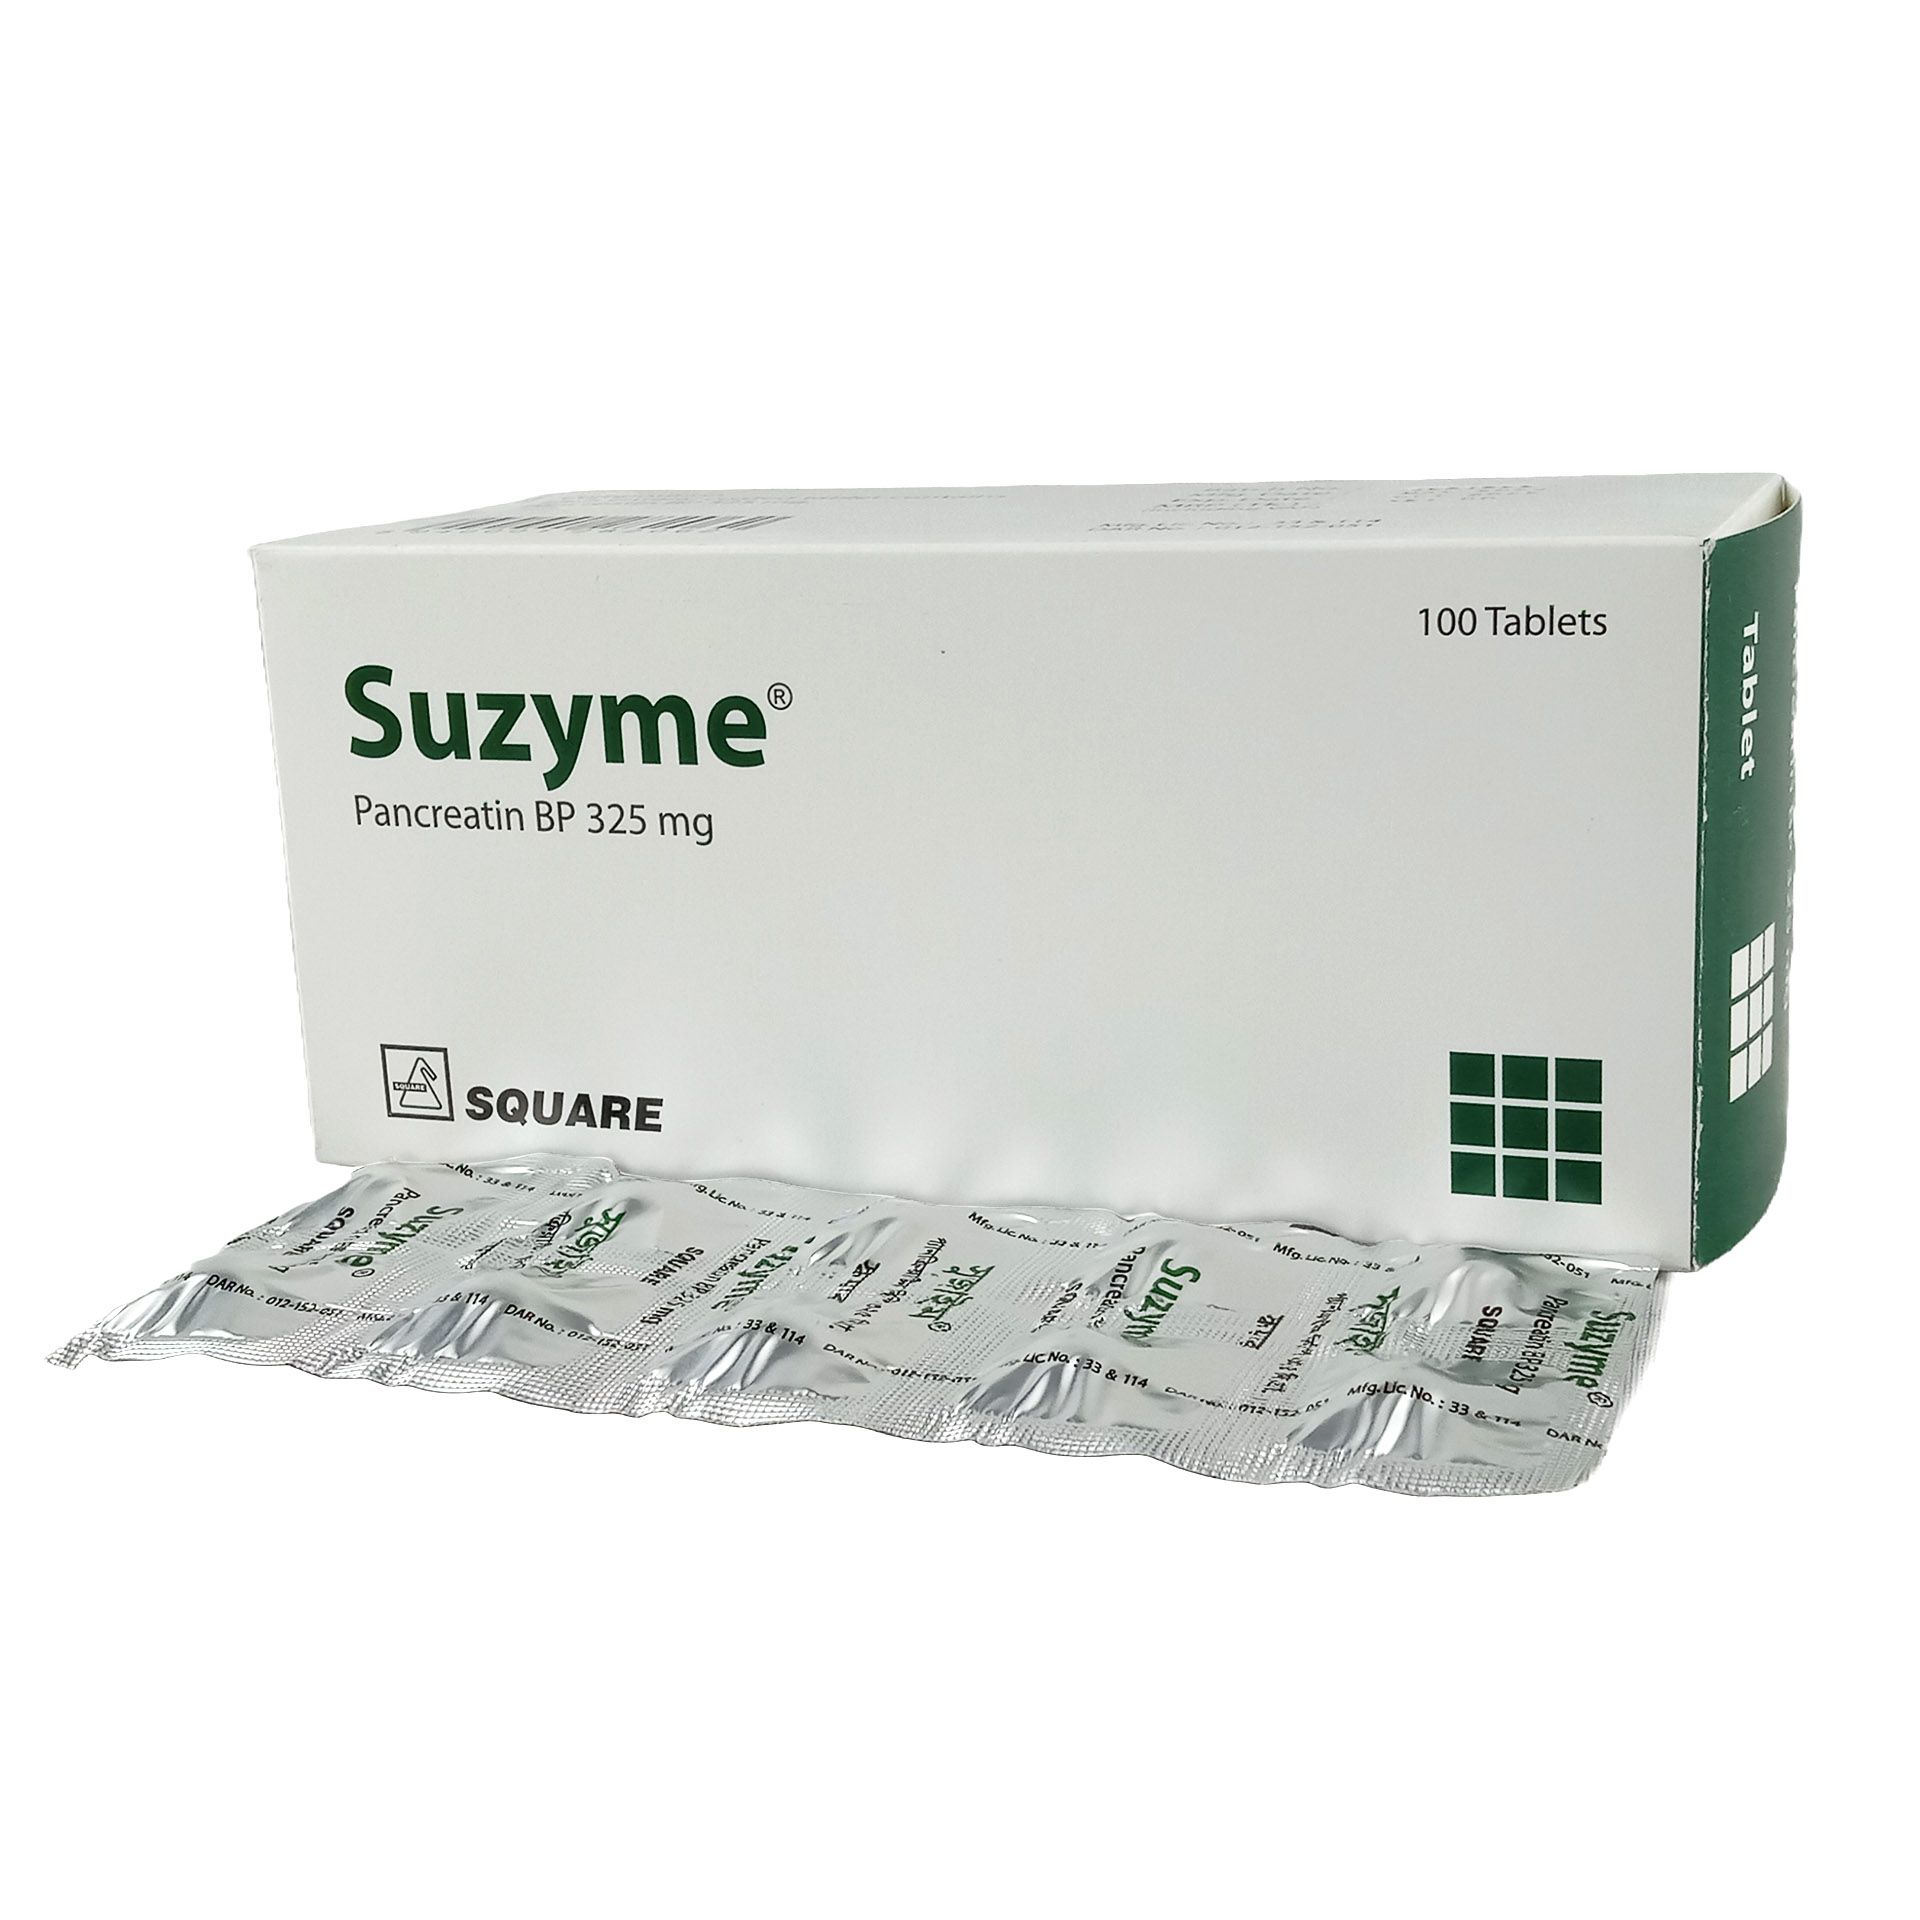 Suzyme 325mg tablet